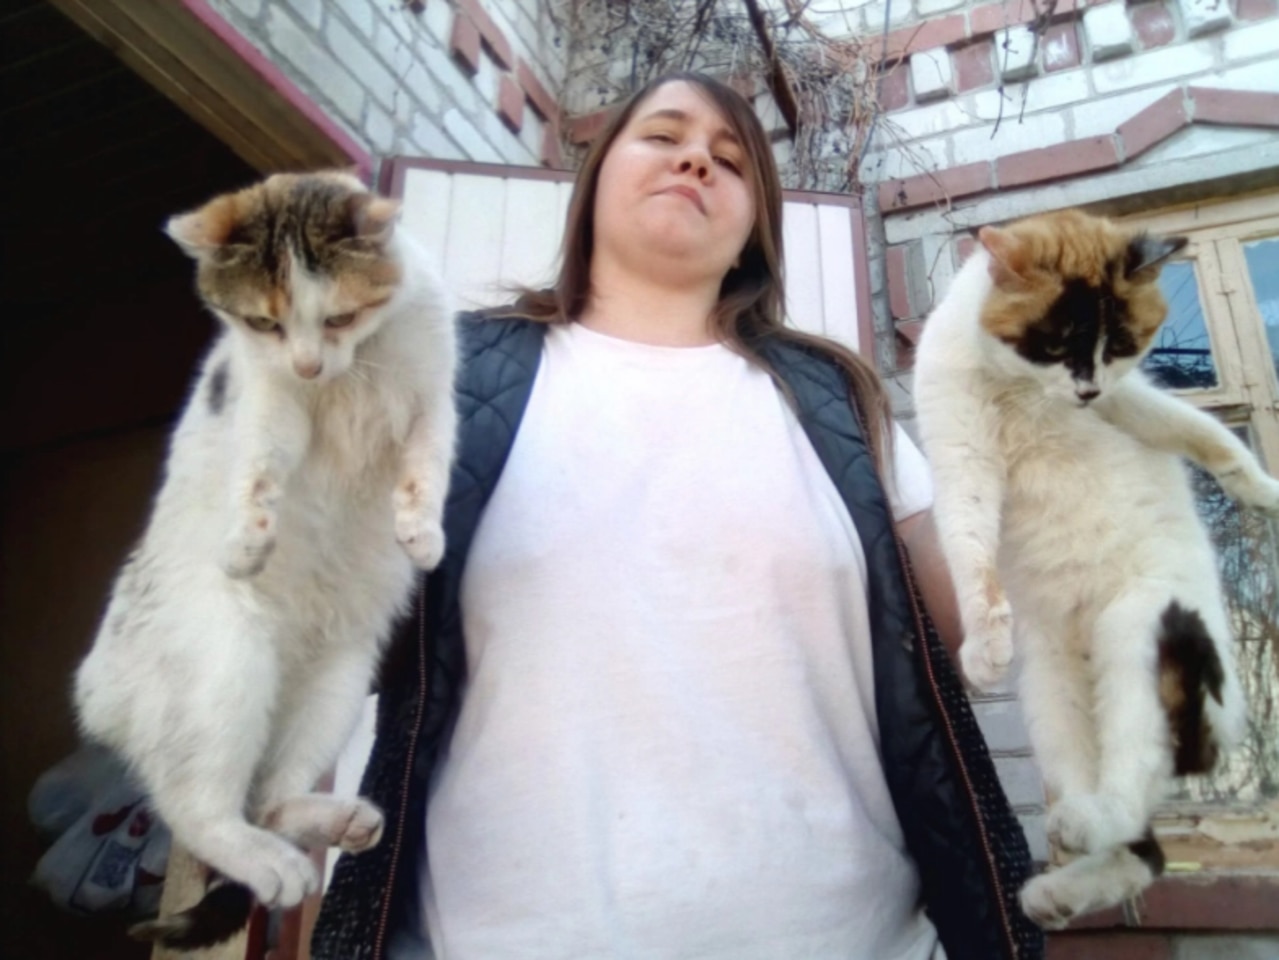 Naked Ukraine woman paid to torture pets to death  —  Australia's leading news site